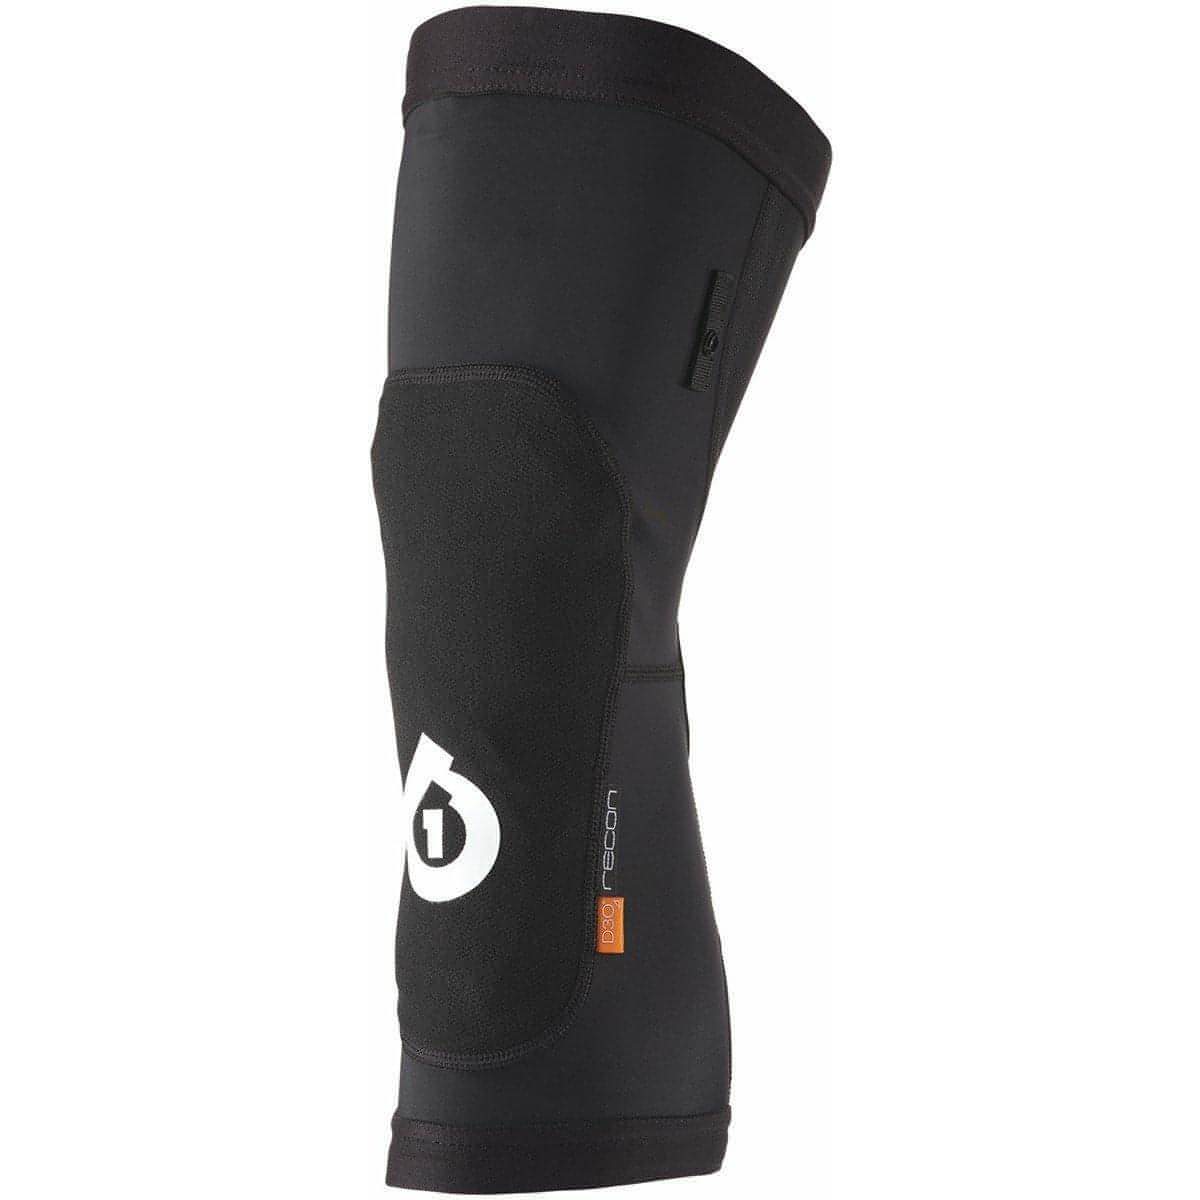 SixSixOne Recon V2 Cycling Knee Guards - Black - Start Fitness